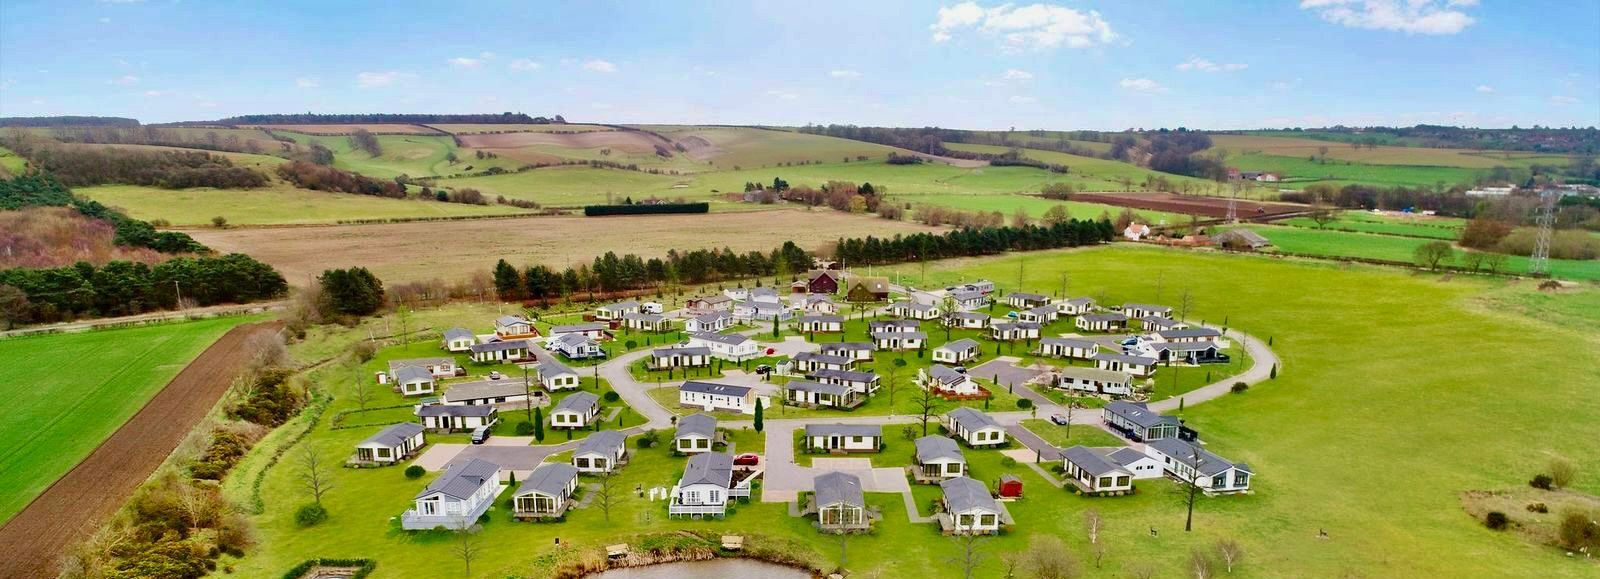 Park homes
Wolds Retreat
Wolds Park homes
Mobile homes